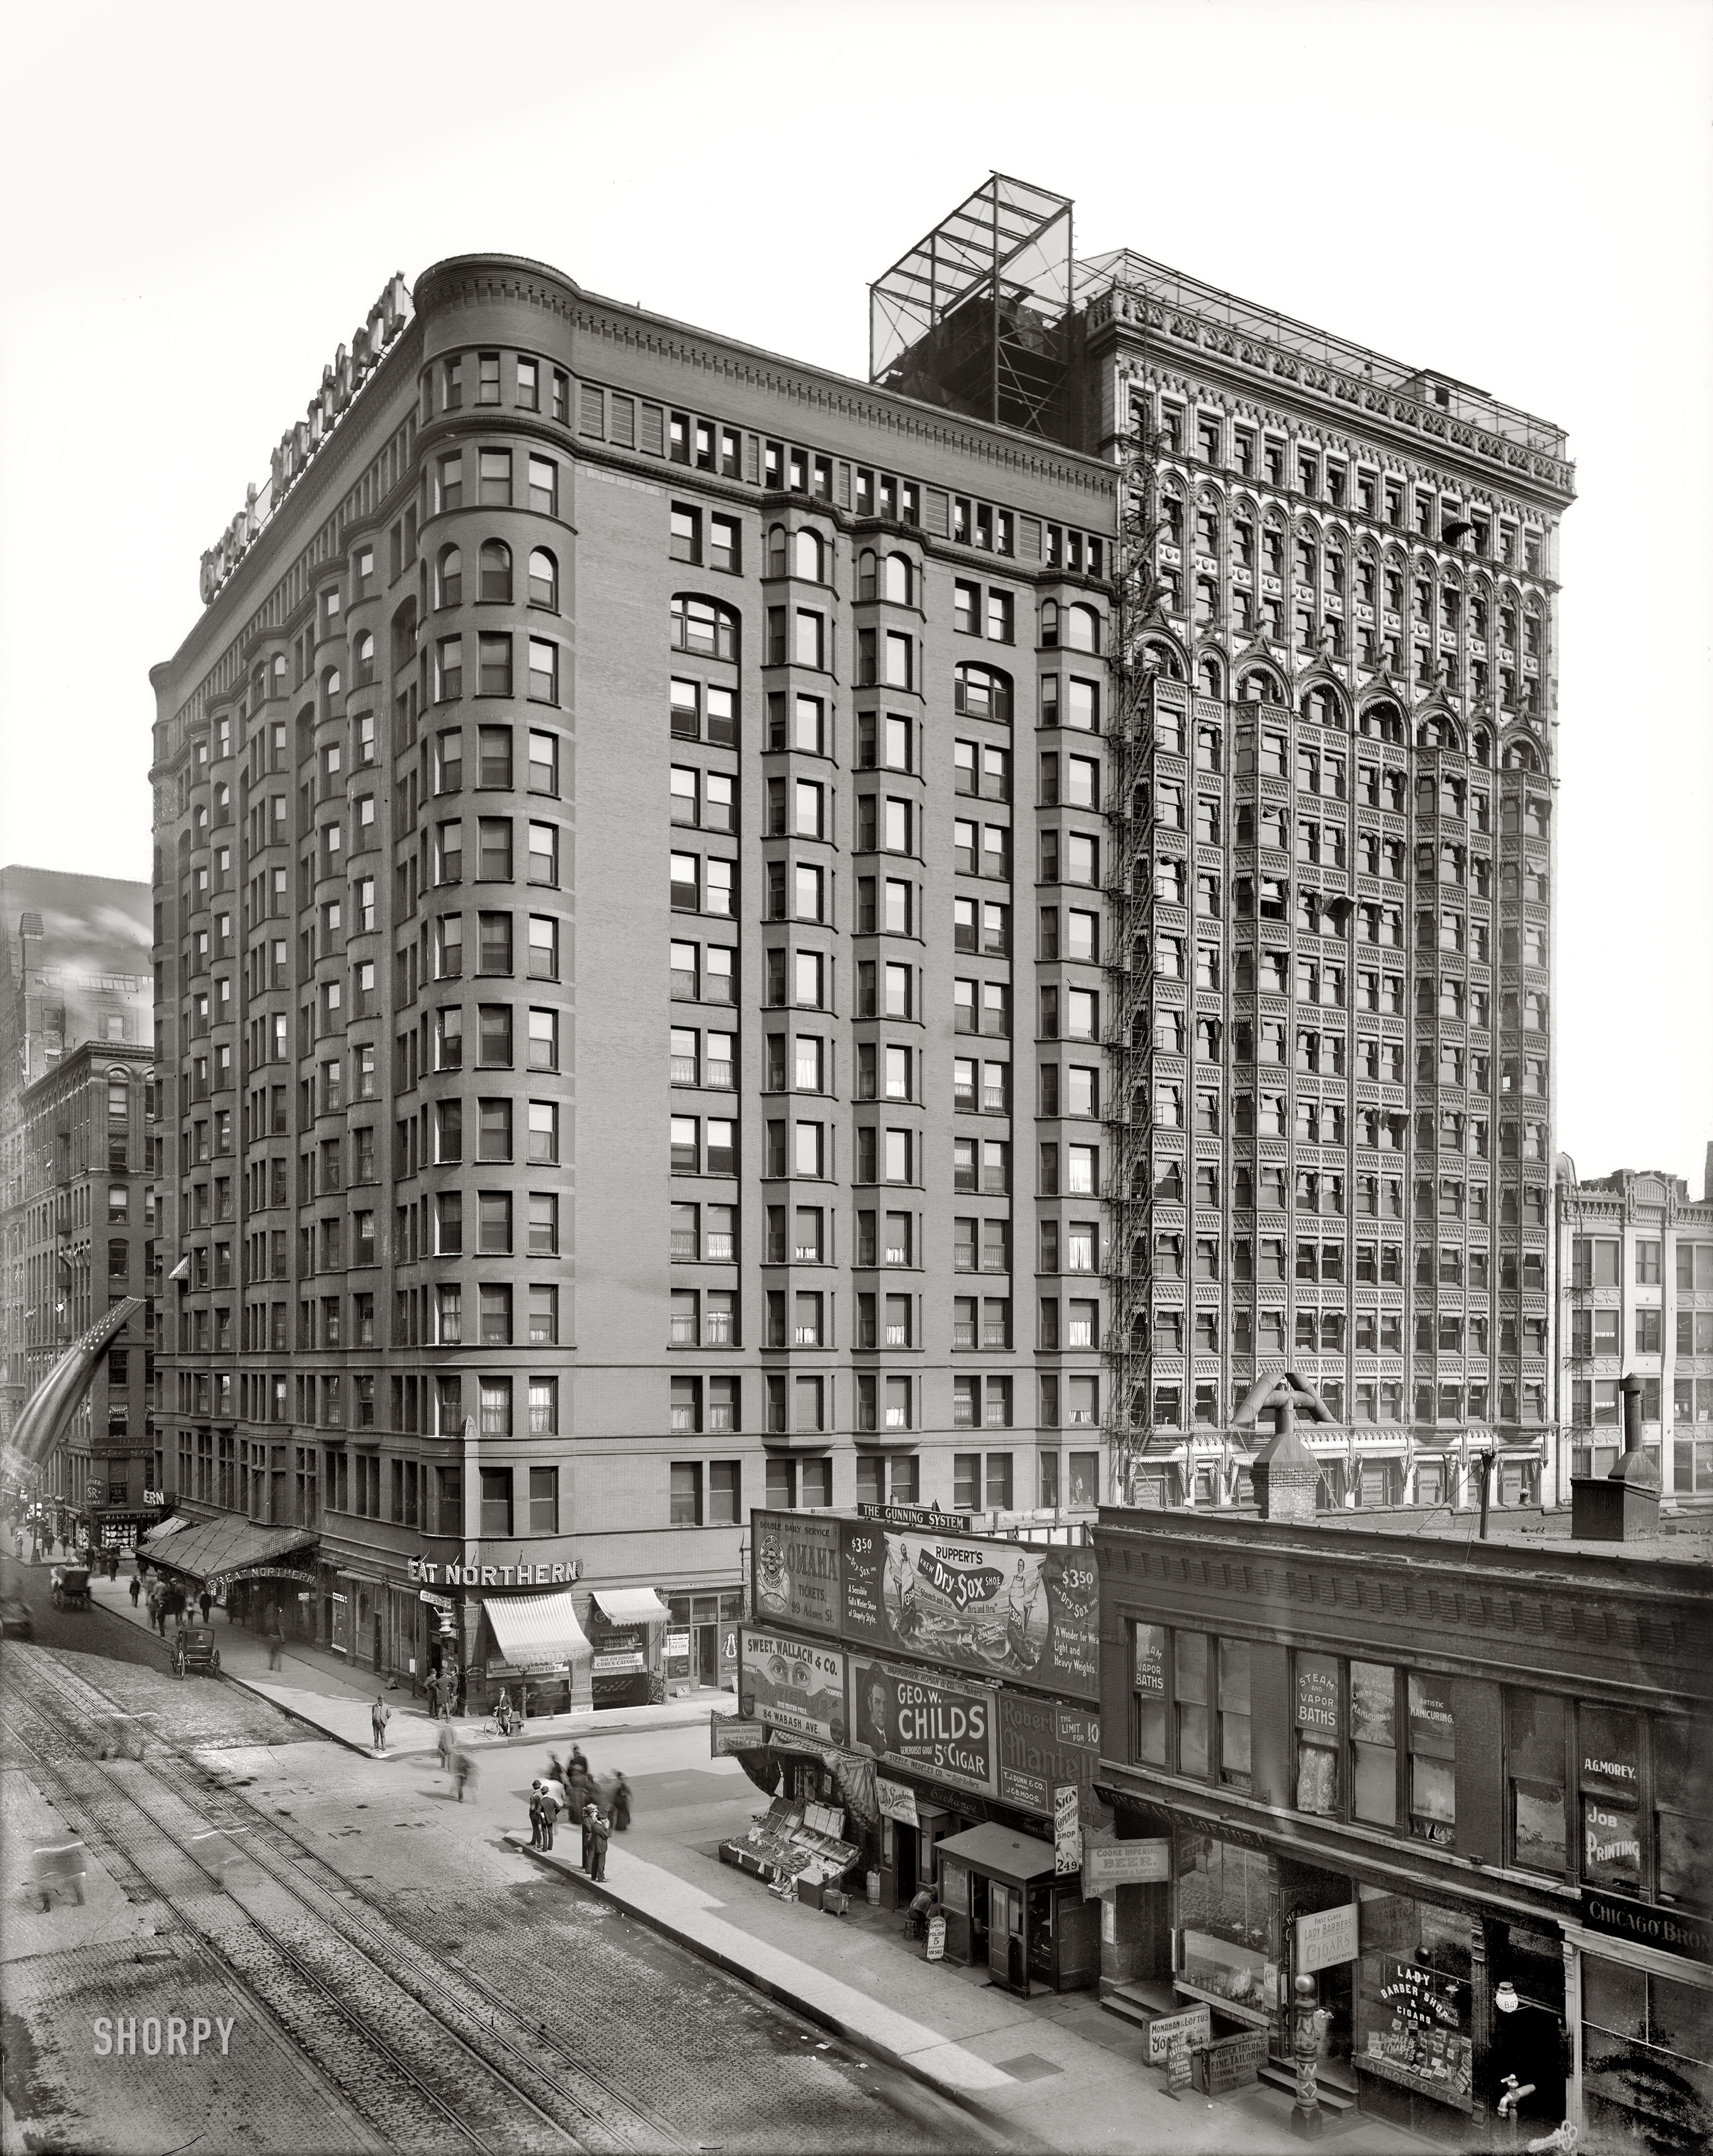 Chicago circa 1900. "Great Northern Hotel and office building, Dearborn and Jackson Streets." Along with perhaps the earliest appearance on these pages of Coca-Cola signage. Also: a "Lady Barber Shop." 8x10 inch glass negative, Detroit Photographic Company. View full size.